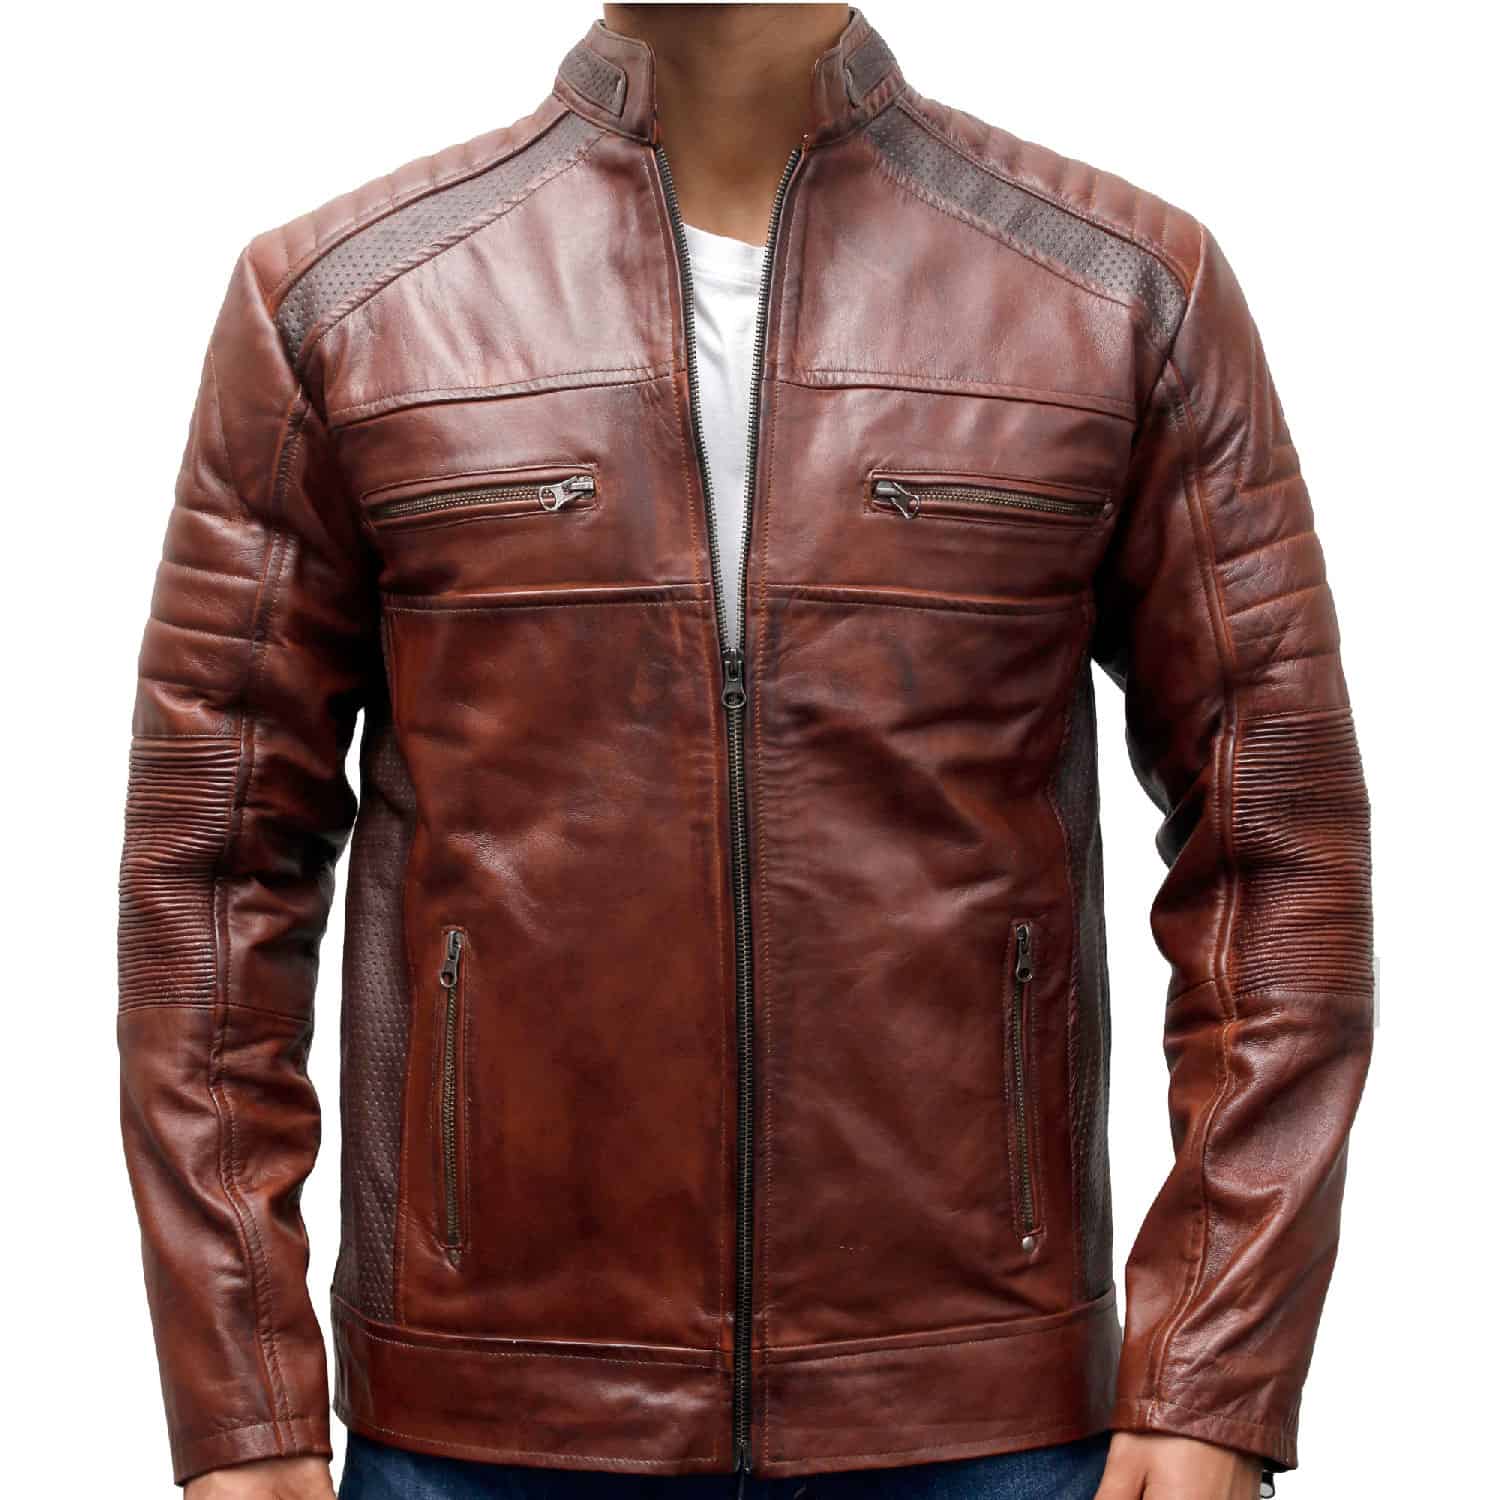 Men's Cafe Racer Distressed Brown Leather Motorcycle Jacket